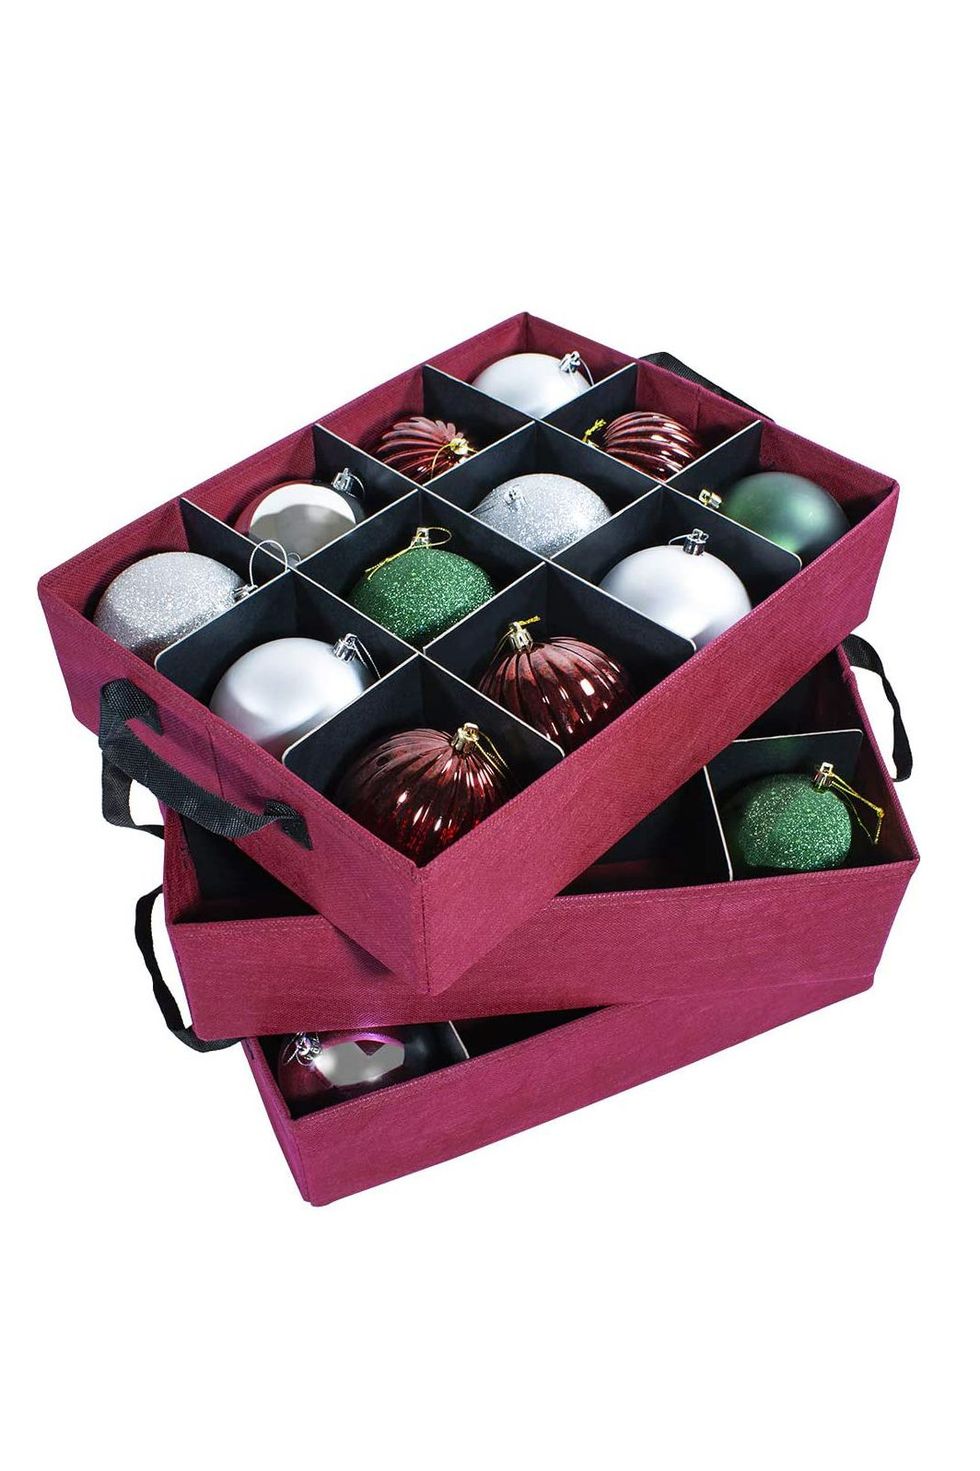 Ornament Storage With Adjustable Dividers